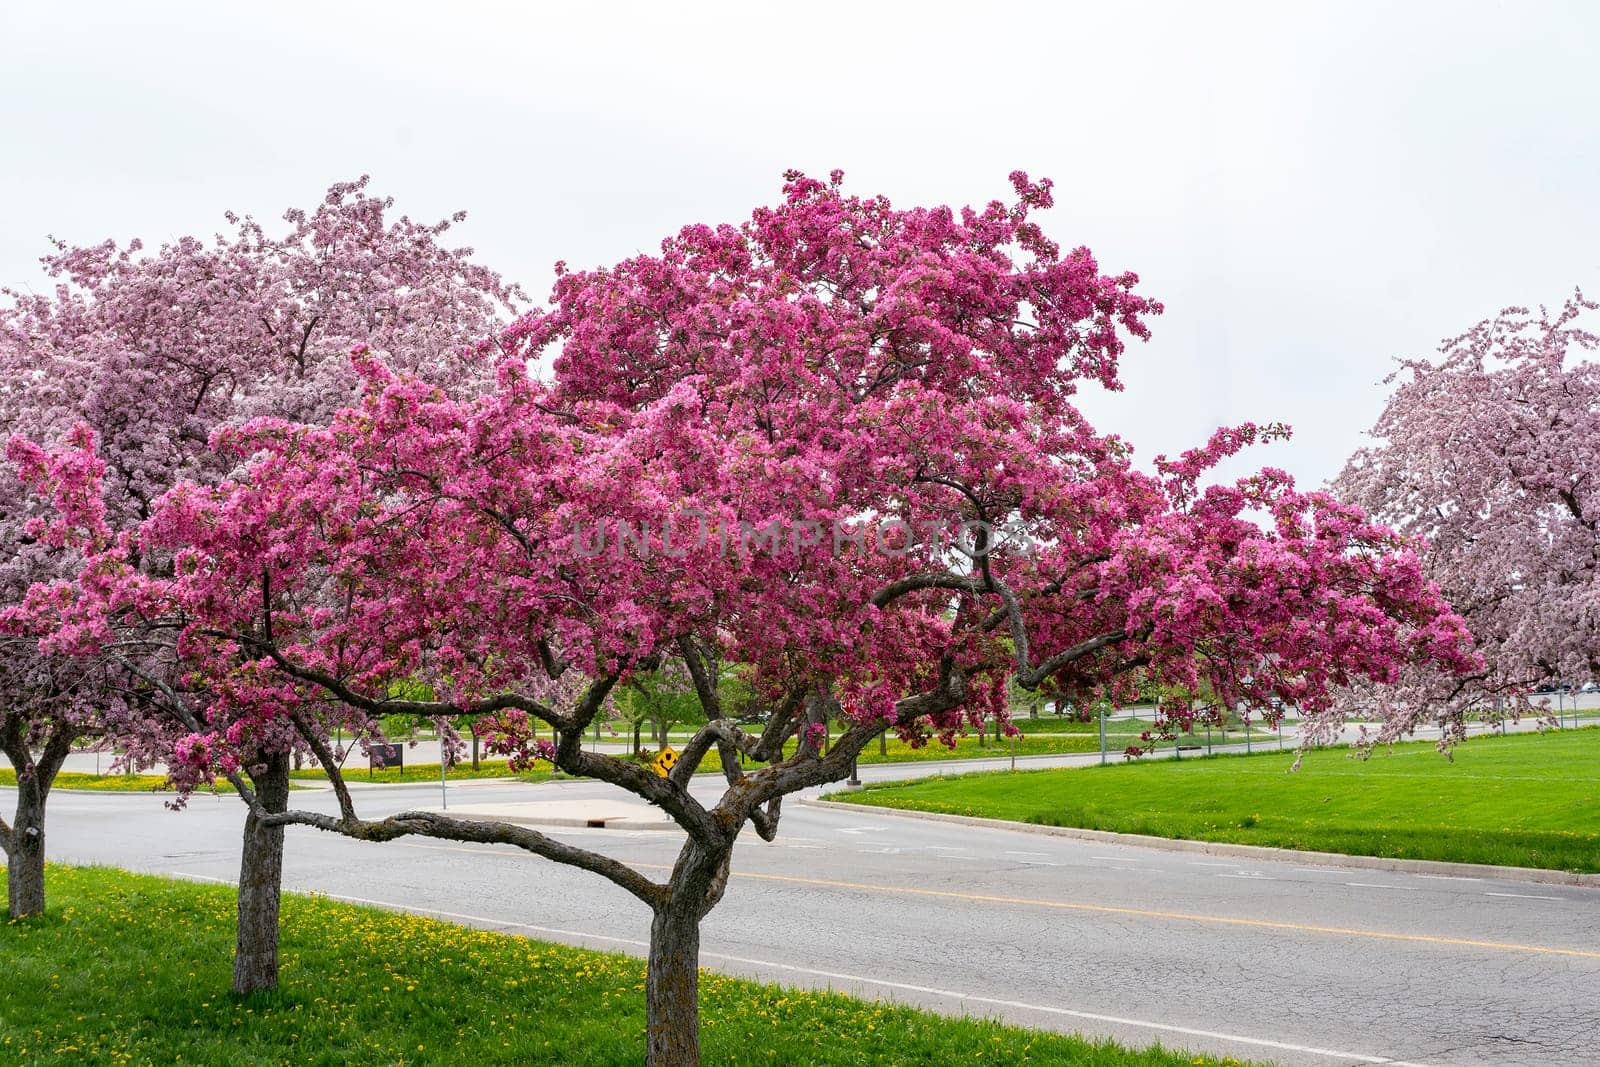 Lush cherry blossoms in Ontario by ben44